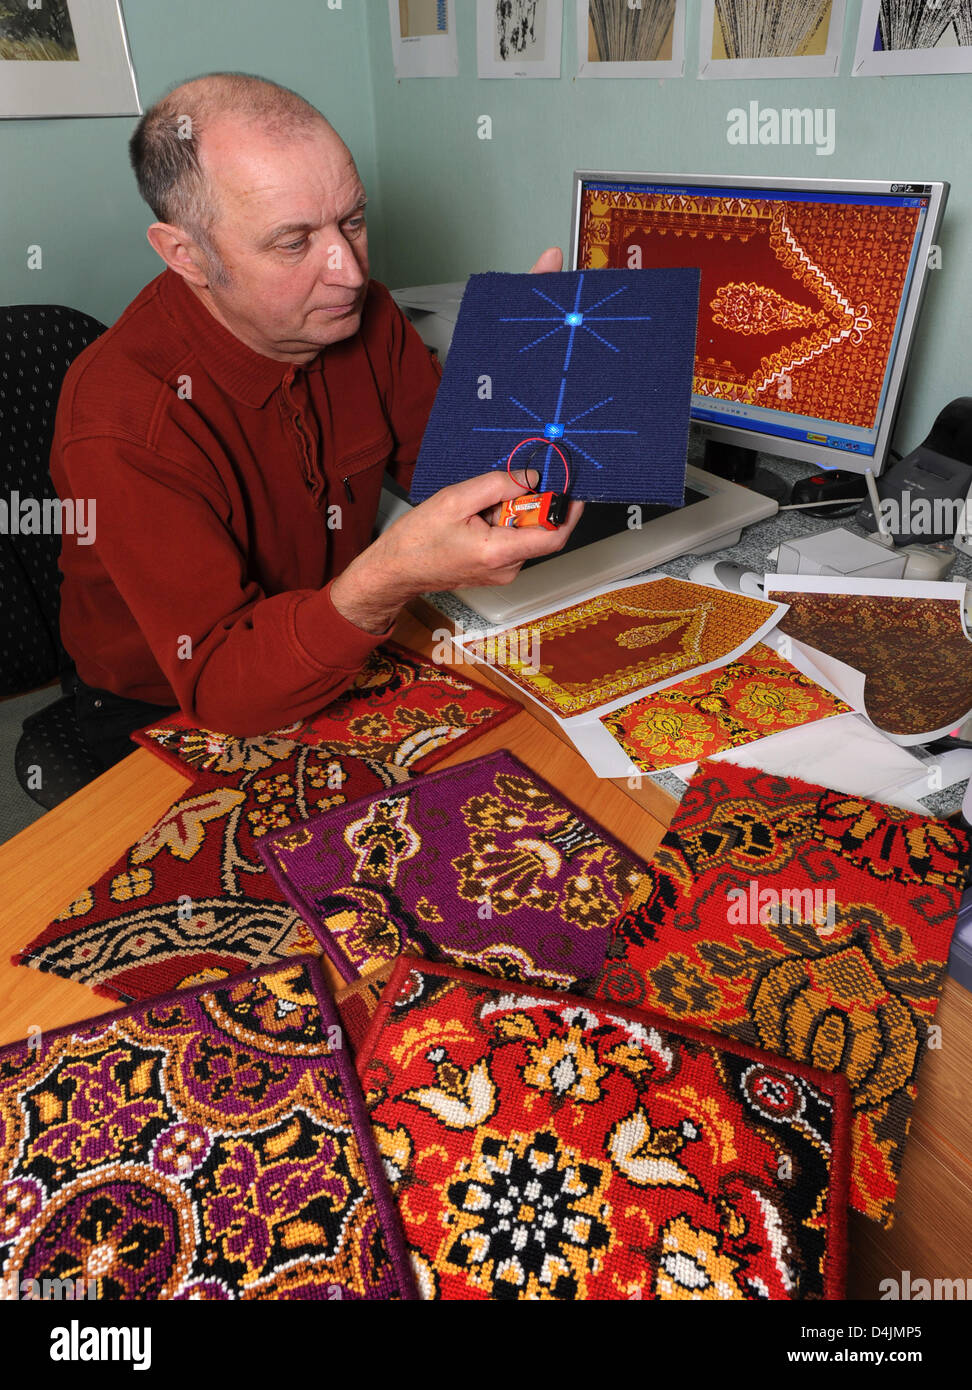 Company director Eberhard Witzschel of the Saxon Carpet Manufactory shows the first prototypes of prayer rugs equipped with GPS chips and light-emitting diodes which indicate the exact direction of Mecca for Muslims in Frankenberg, Germany, 16 February 2009. This patented idea is to be made ready for marketing in cooperation with an electronics company in North Rhine Westfalia. The Stock Photo